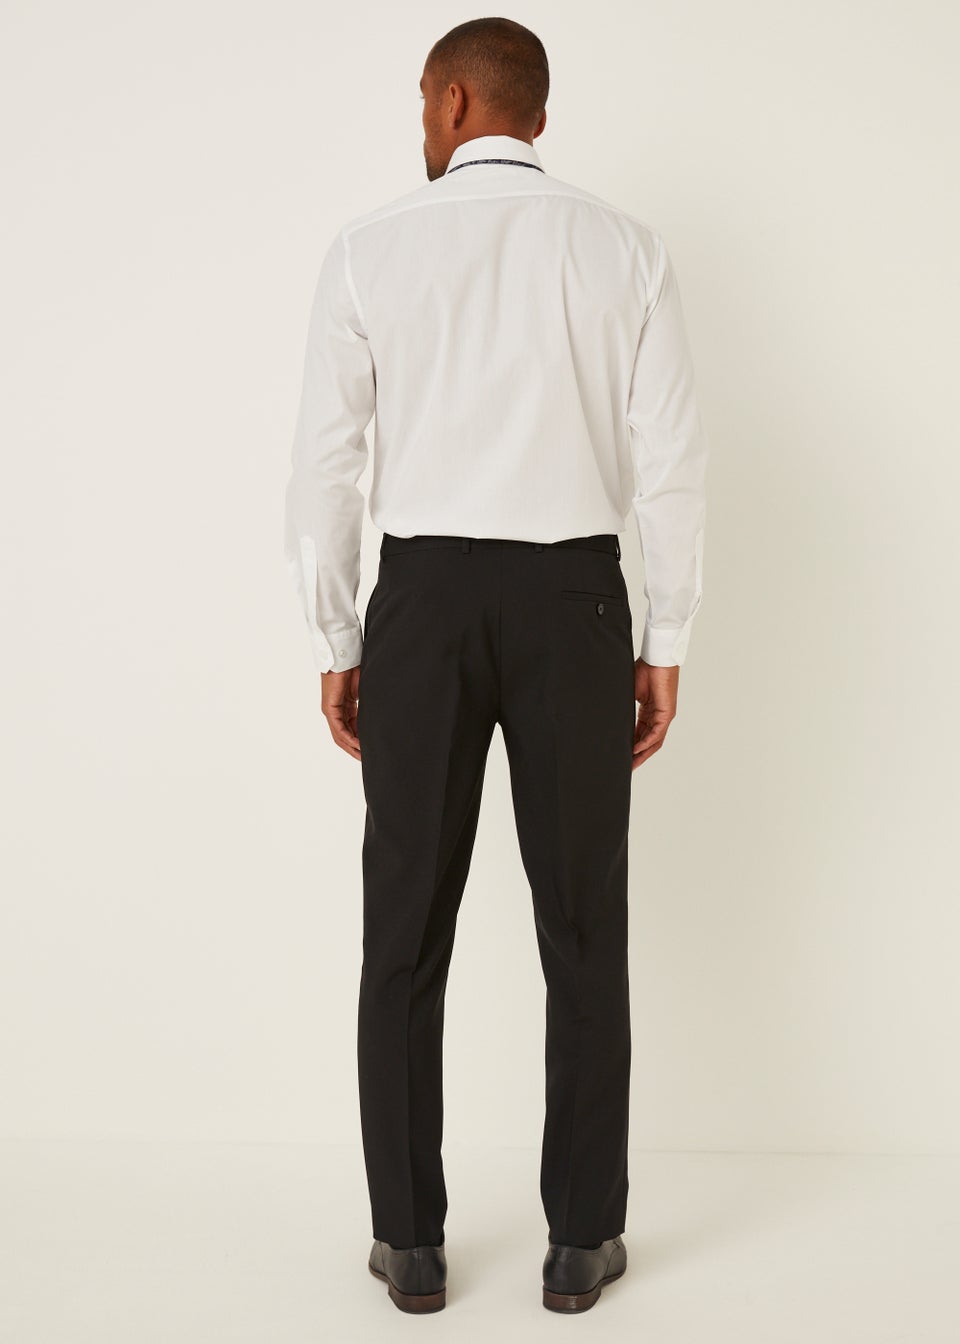 Taylor & Wright Panama Black Tailored Fit Suit Trousers